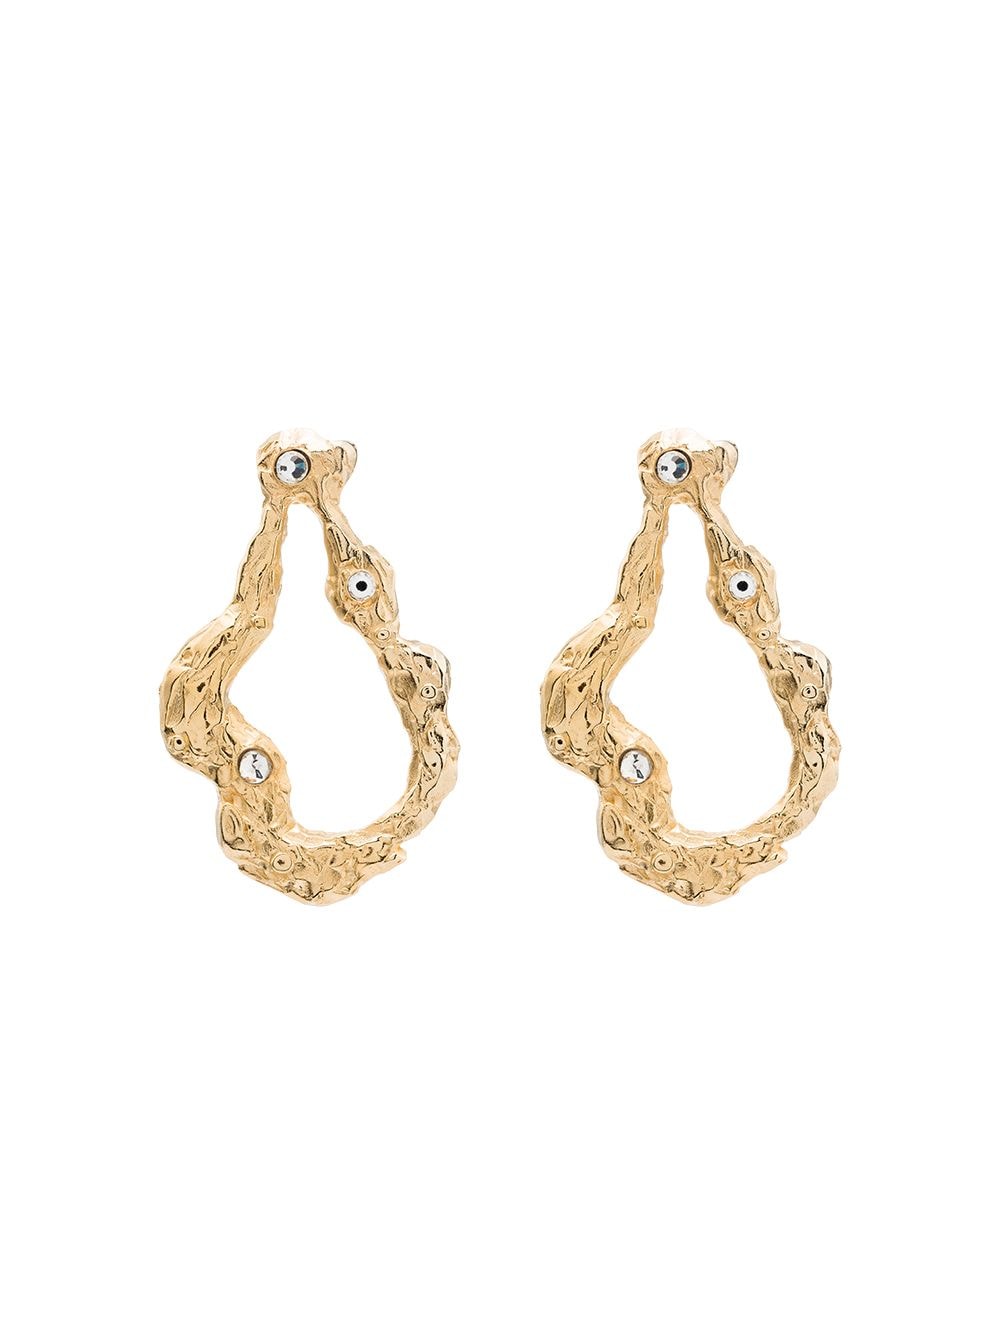 BY ALONA DIANA 18KT GOLD-PLATED CRYSTAL DROP EARRINGS